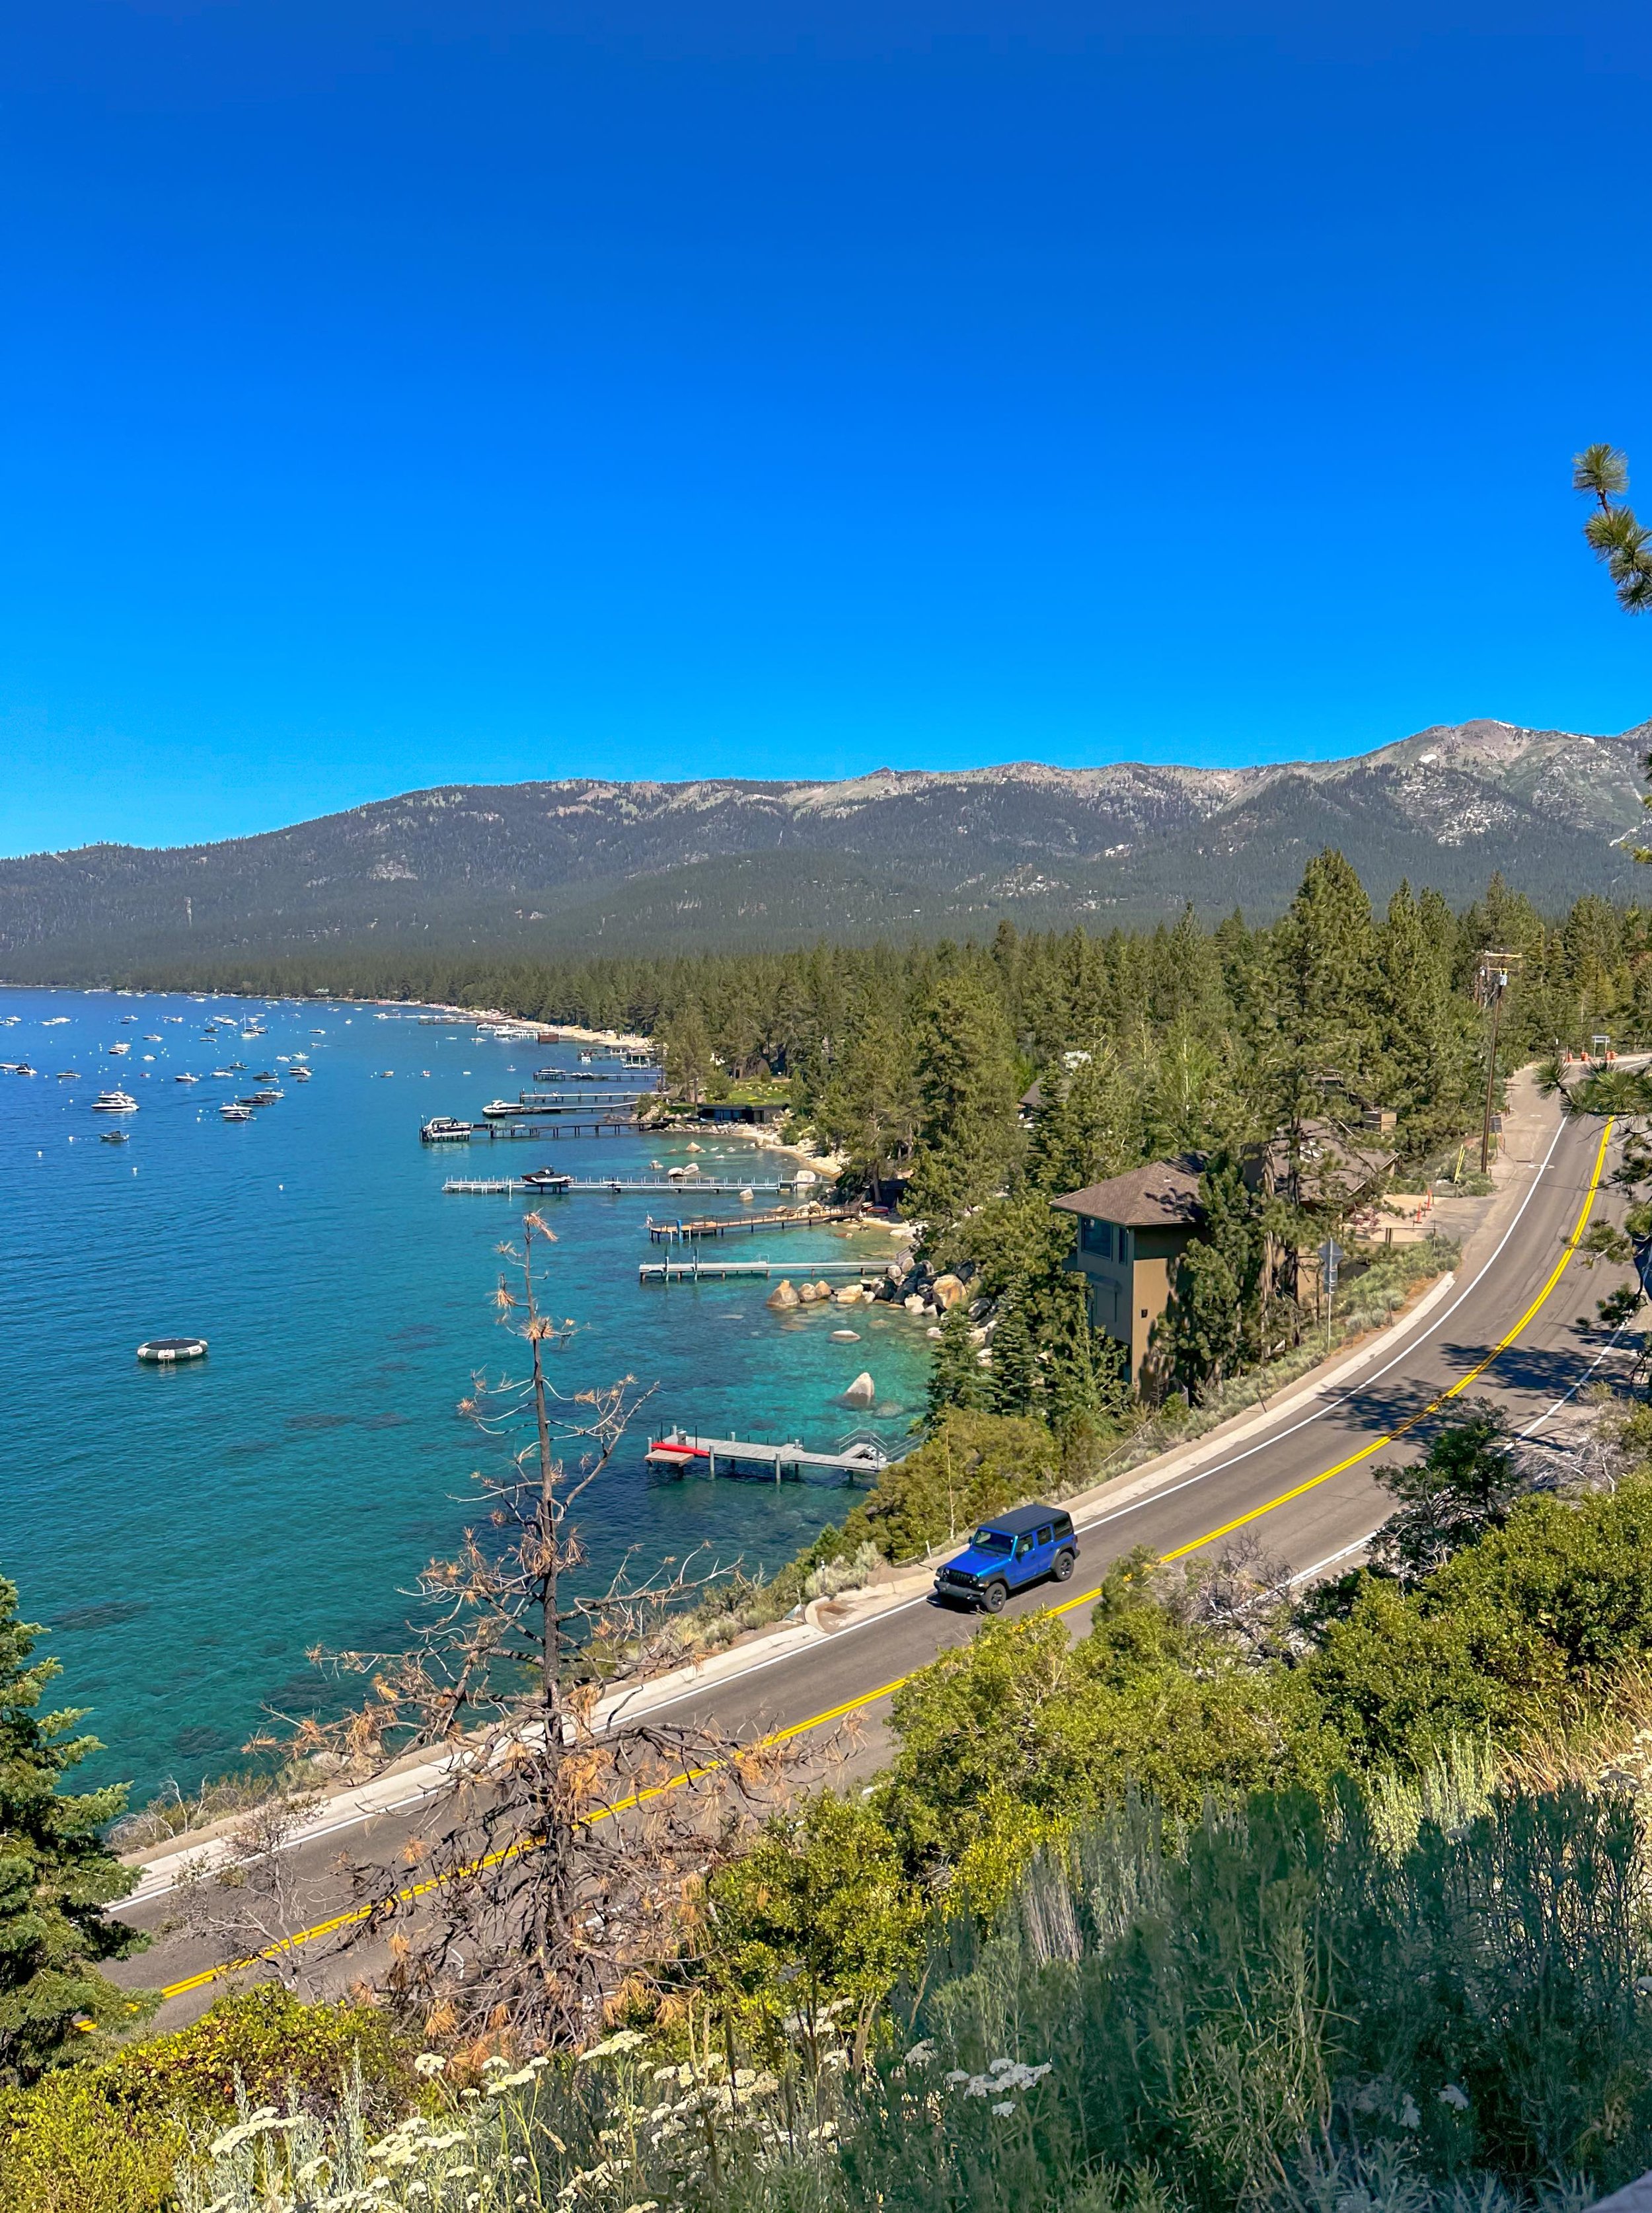 I. Introduction to Scenic Diving in Lake Tahoe